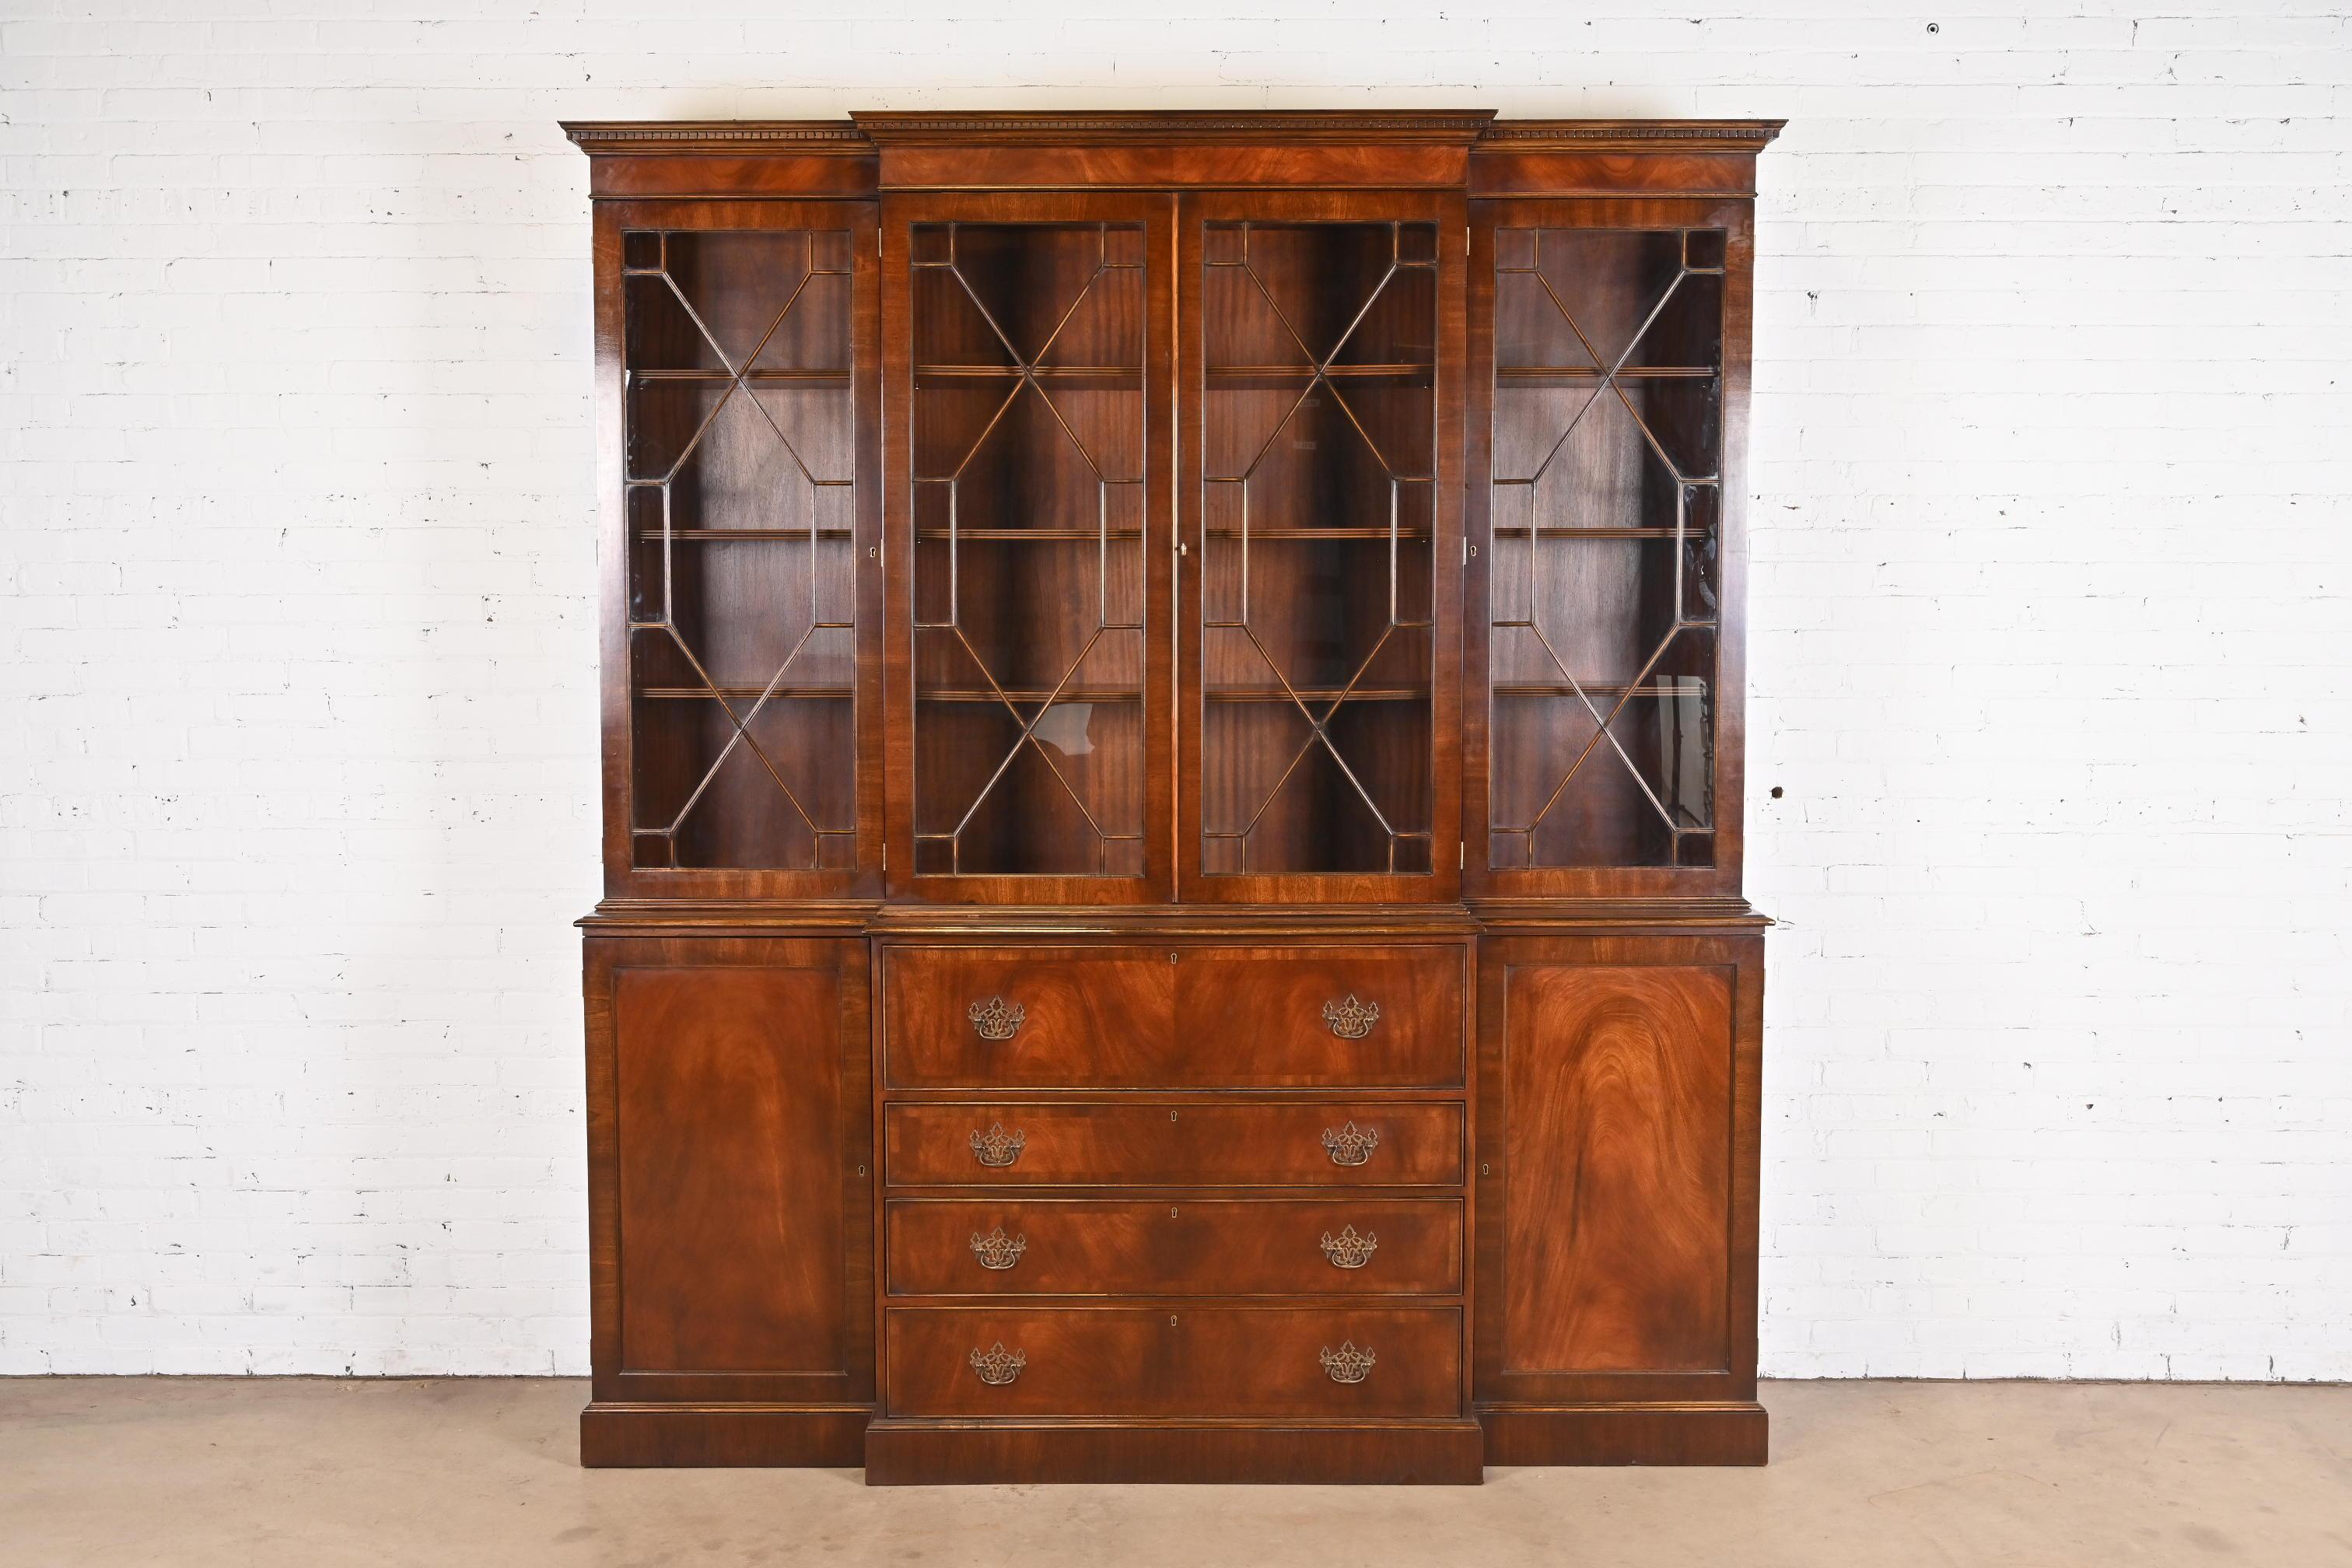 A gorgeous Georgian or Chippendale style monumental breakfront bookcase cabinet with drop front leather top secretary desk

By Trosby Furniture

USA, Circa 1980s

Carved flame mahogany, with mullioned glass front doors, original brass hardware, and